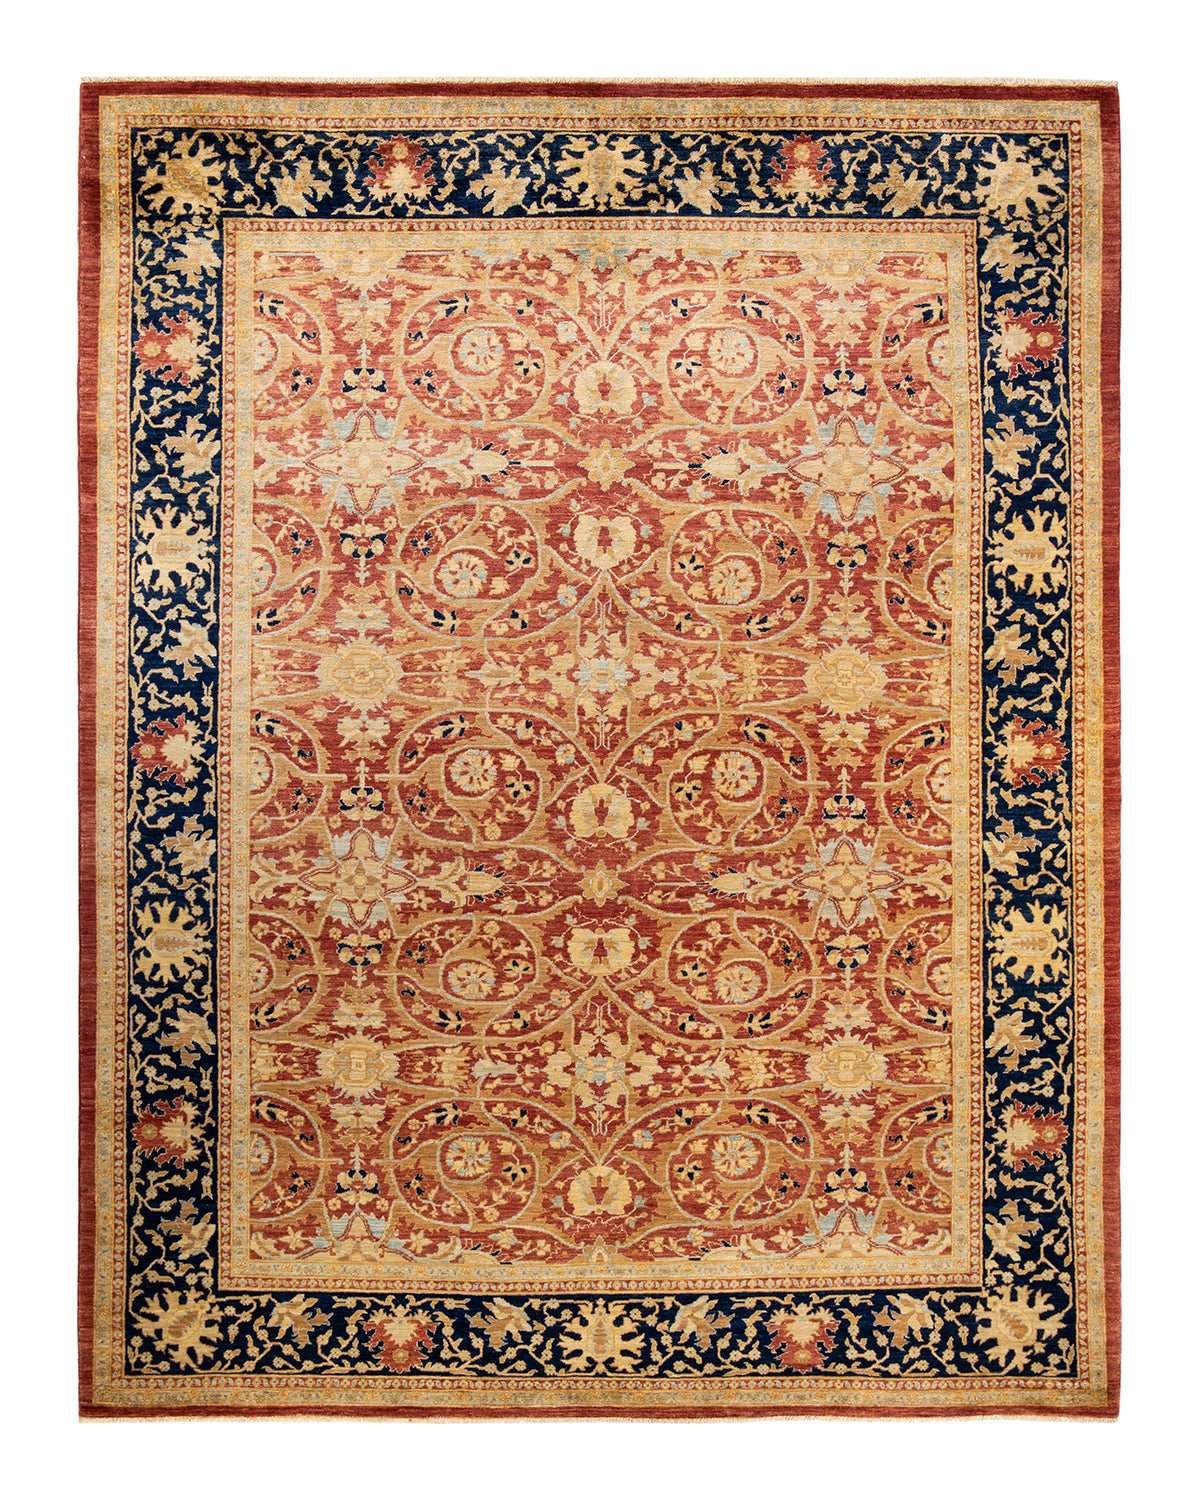 Eclectic, One-of-a-Kind Hand-Knotted Area Rug  - Orange, 9' 2" x 11' 9"